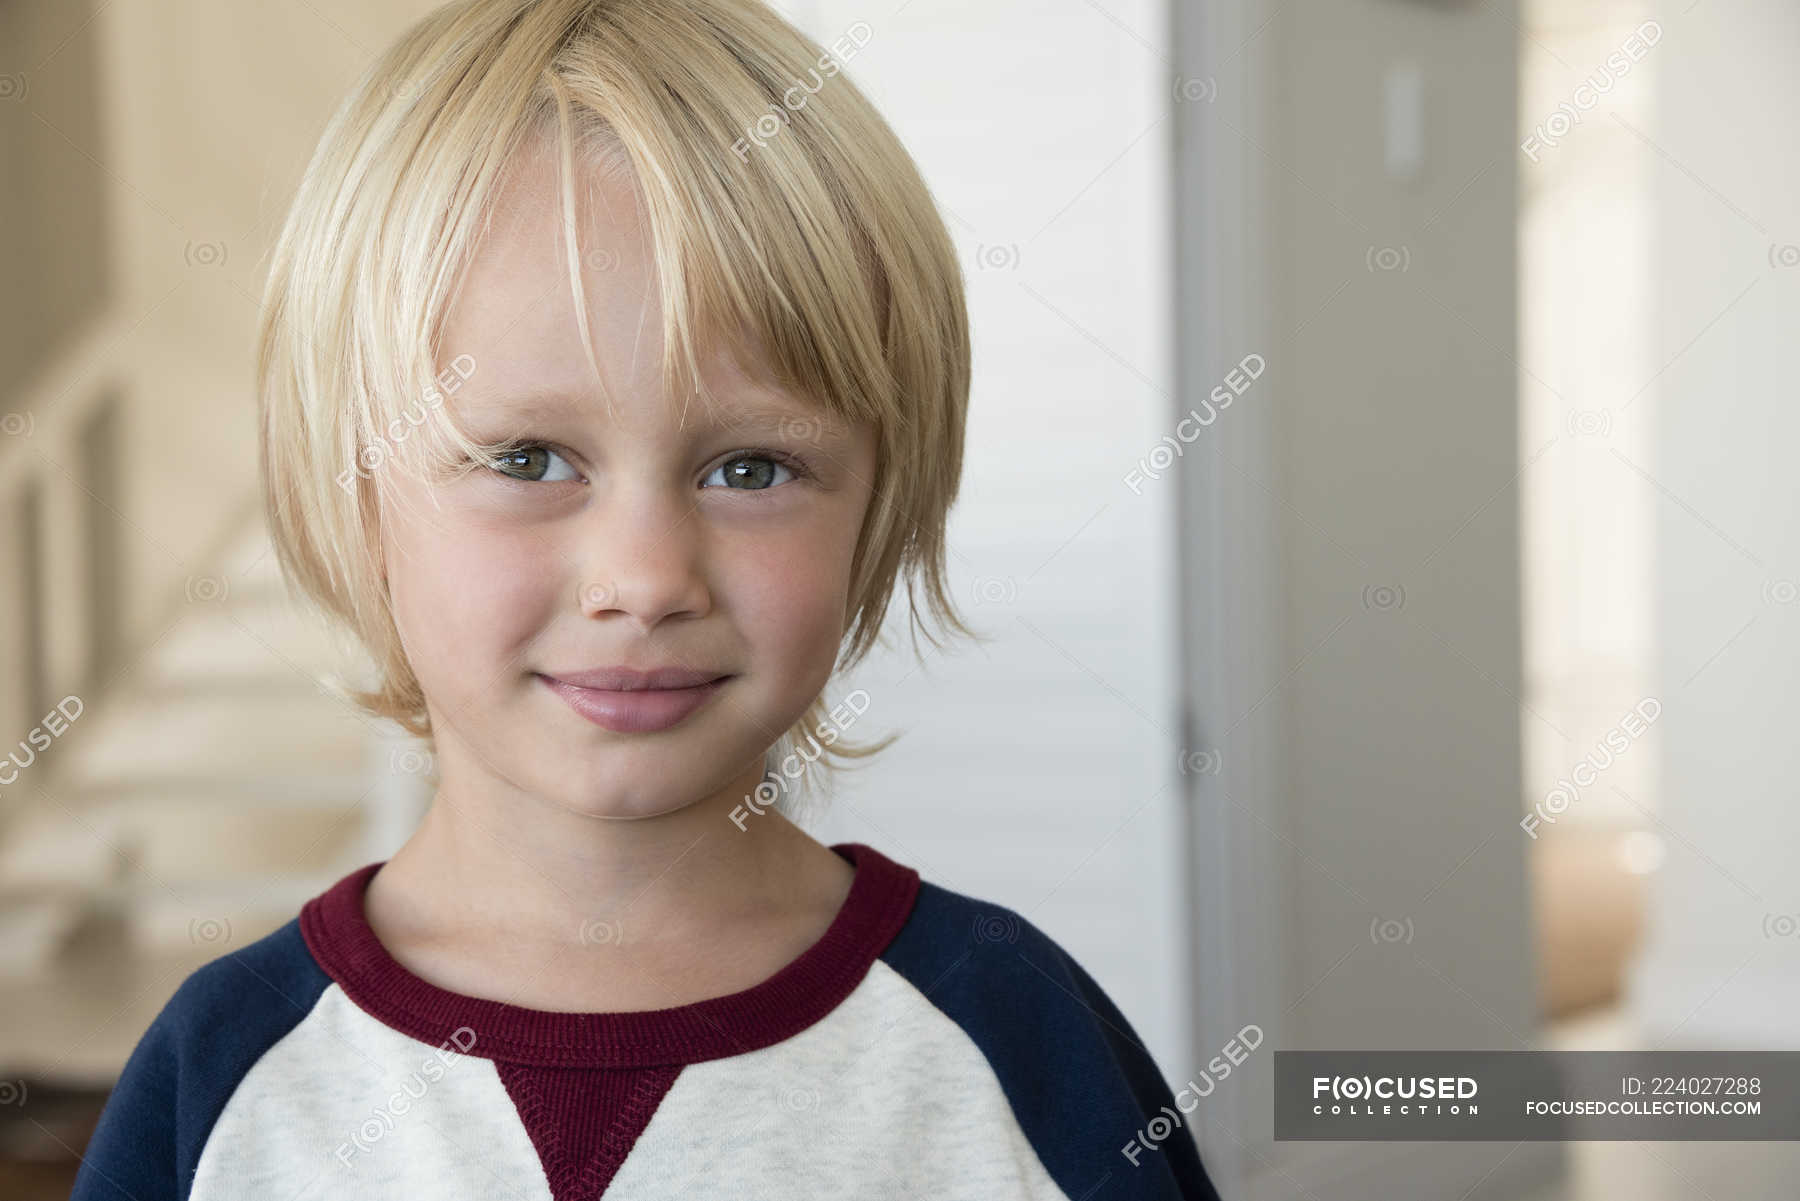 3. Toddler Boy with Natural Blonde Curls - wide 3